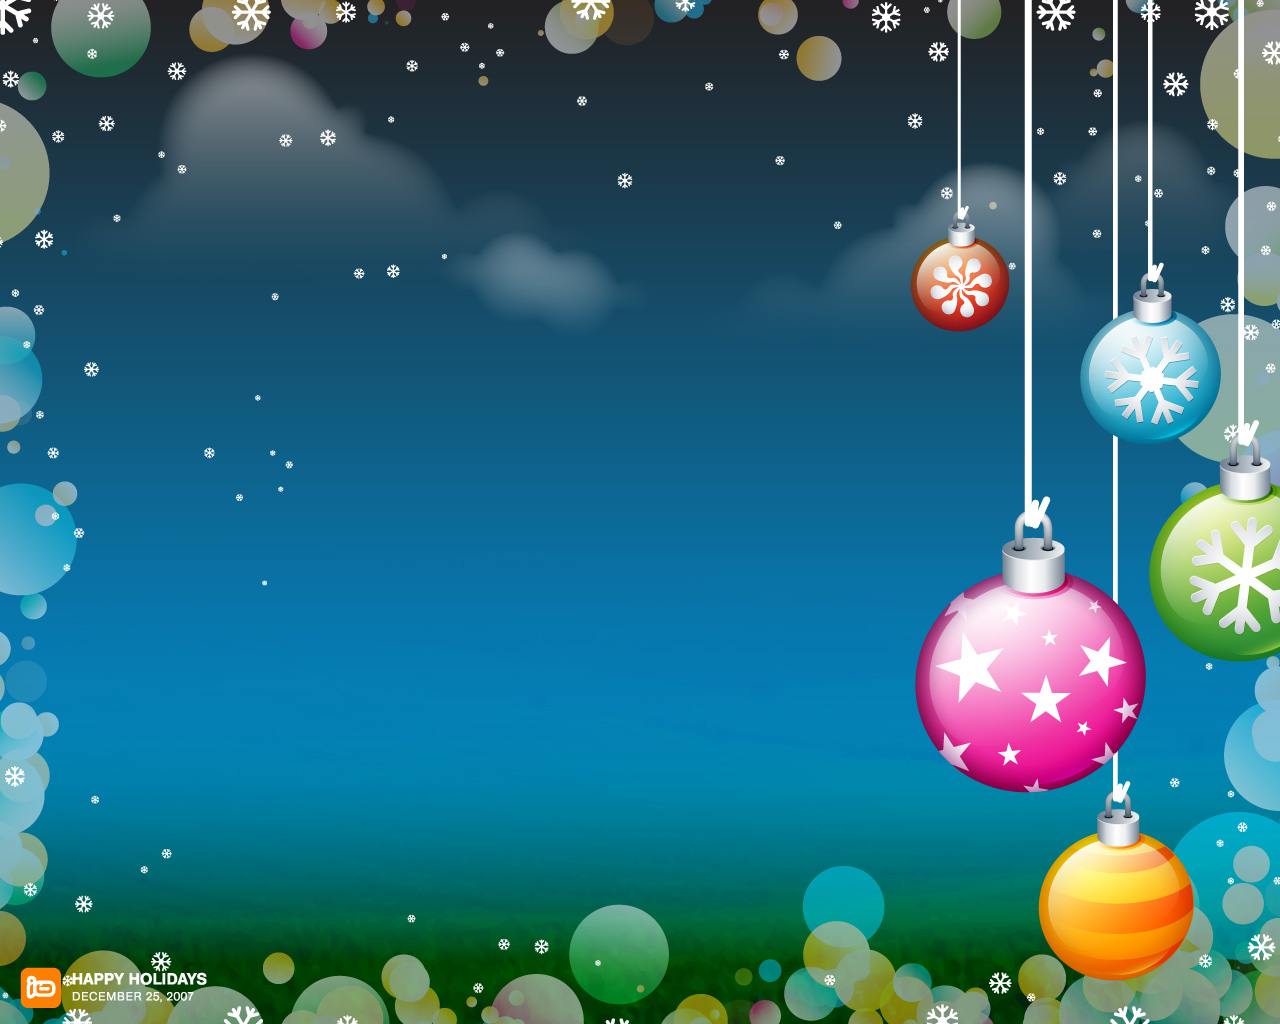 Christmas Vector Decorations Wallpapers | Free Christian ...